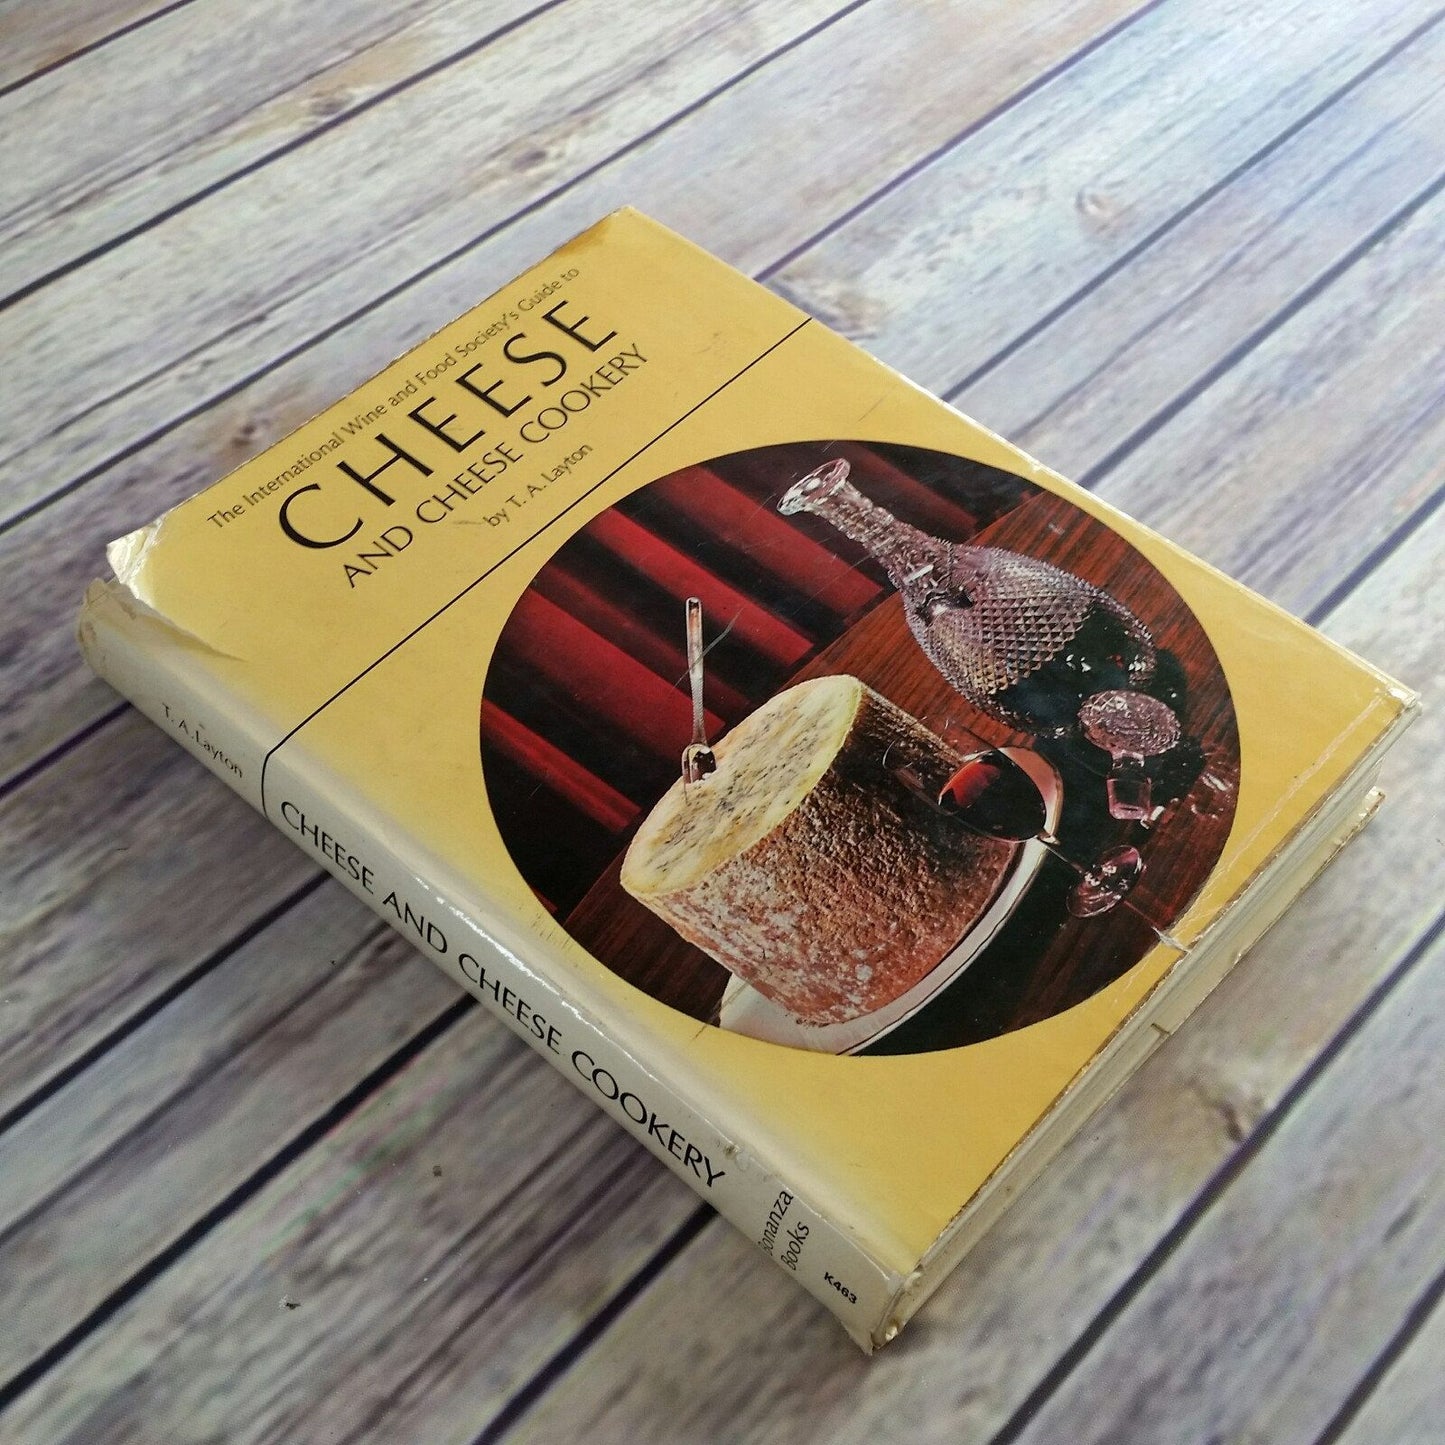 Vintage Cookbook Cheese Cookery Recipes 1971 TA Layton 1970s Wine and Food Society Guide WITH Dust Jacket